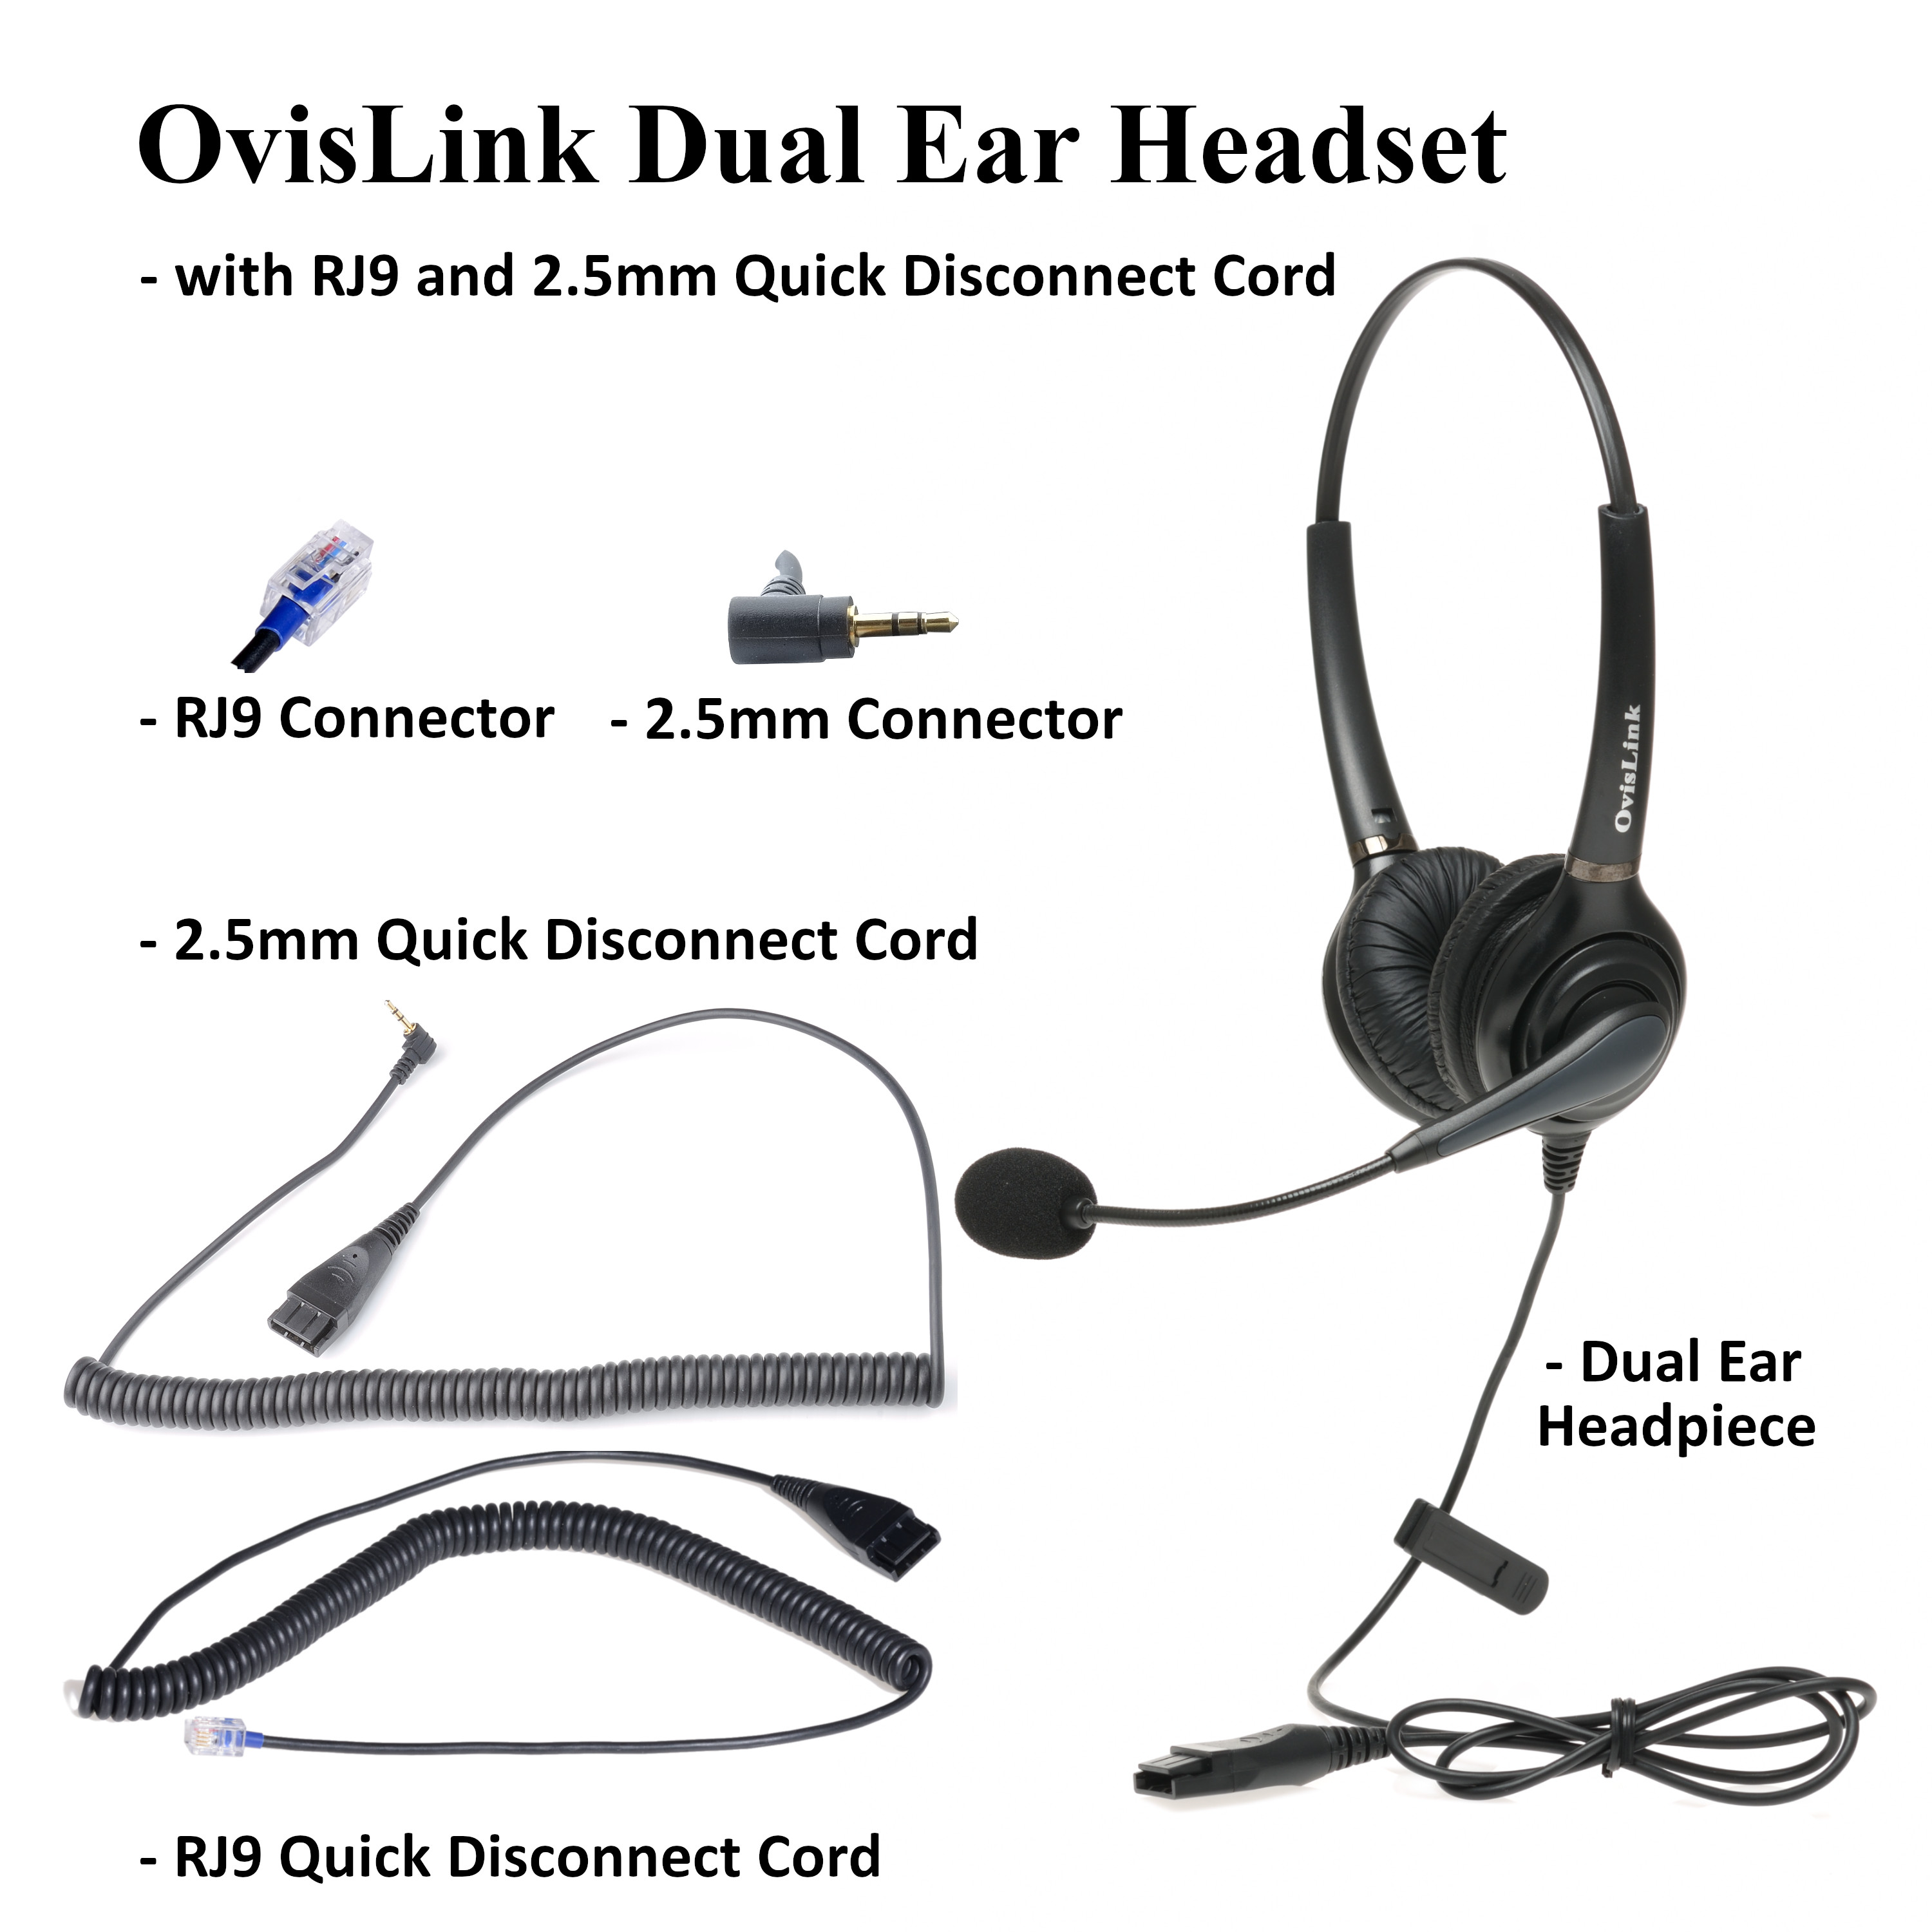 OvisLink Dual Ear Headset with RJ9 and 2.5mm Quick Disconnect Cords